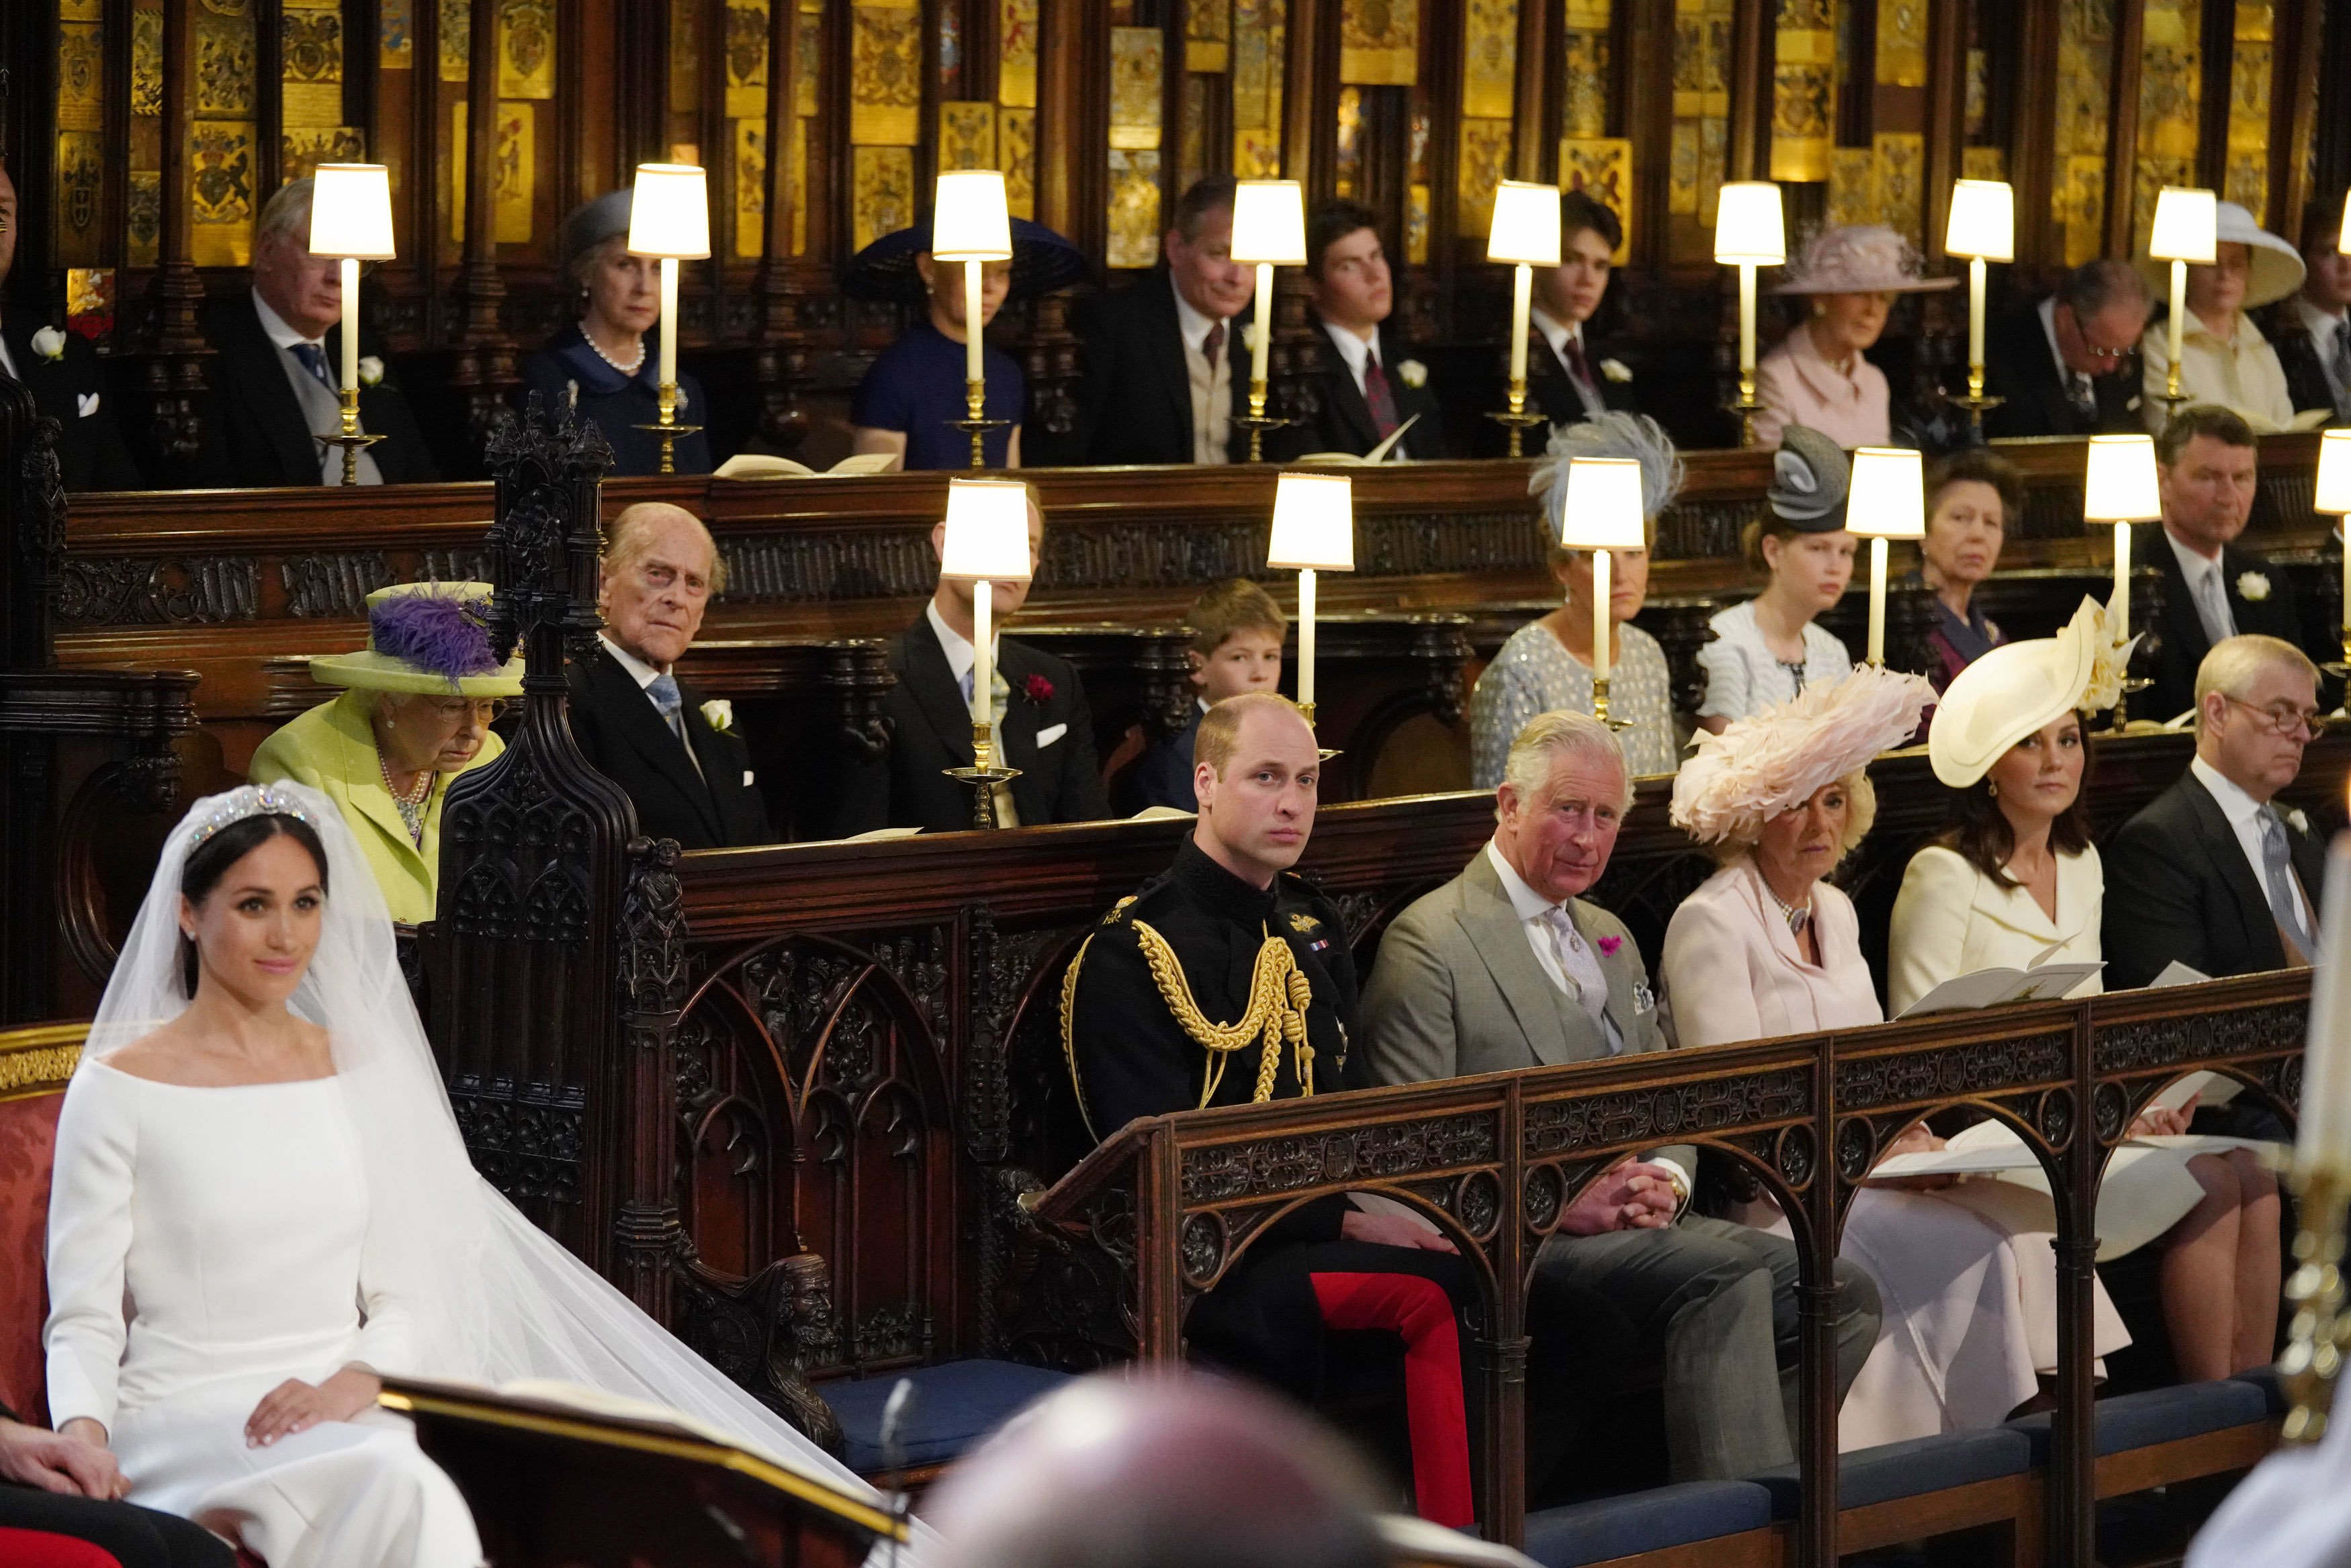 Members of the royal family as Prince Harry marries Meghan Markle in St George's Chapel at Windsor Castle on May 19 , 2018 in Windsor, England | Source: Getty Images